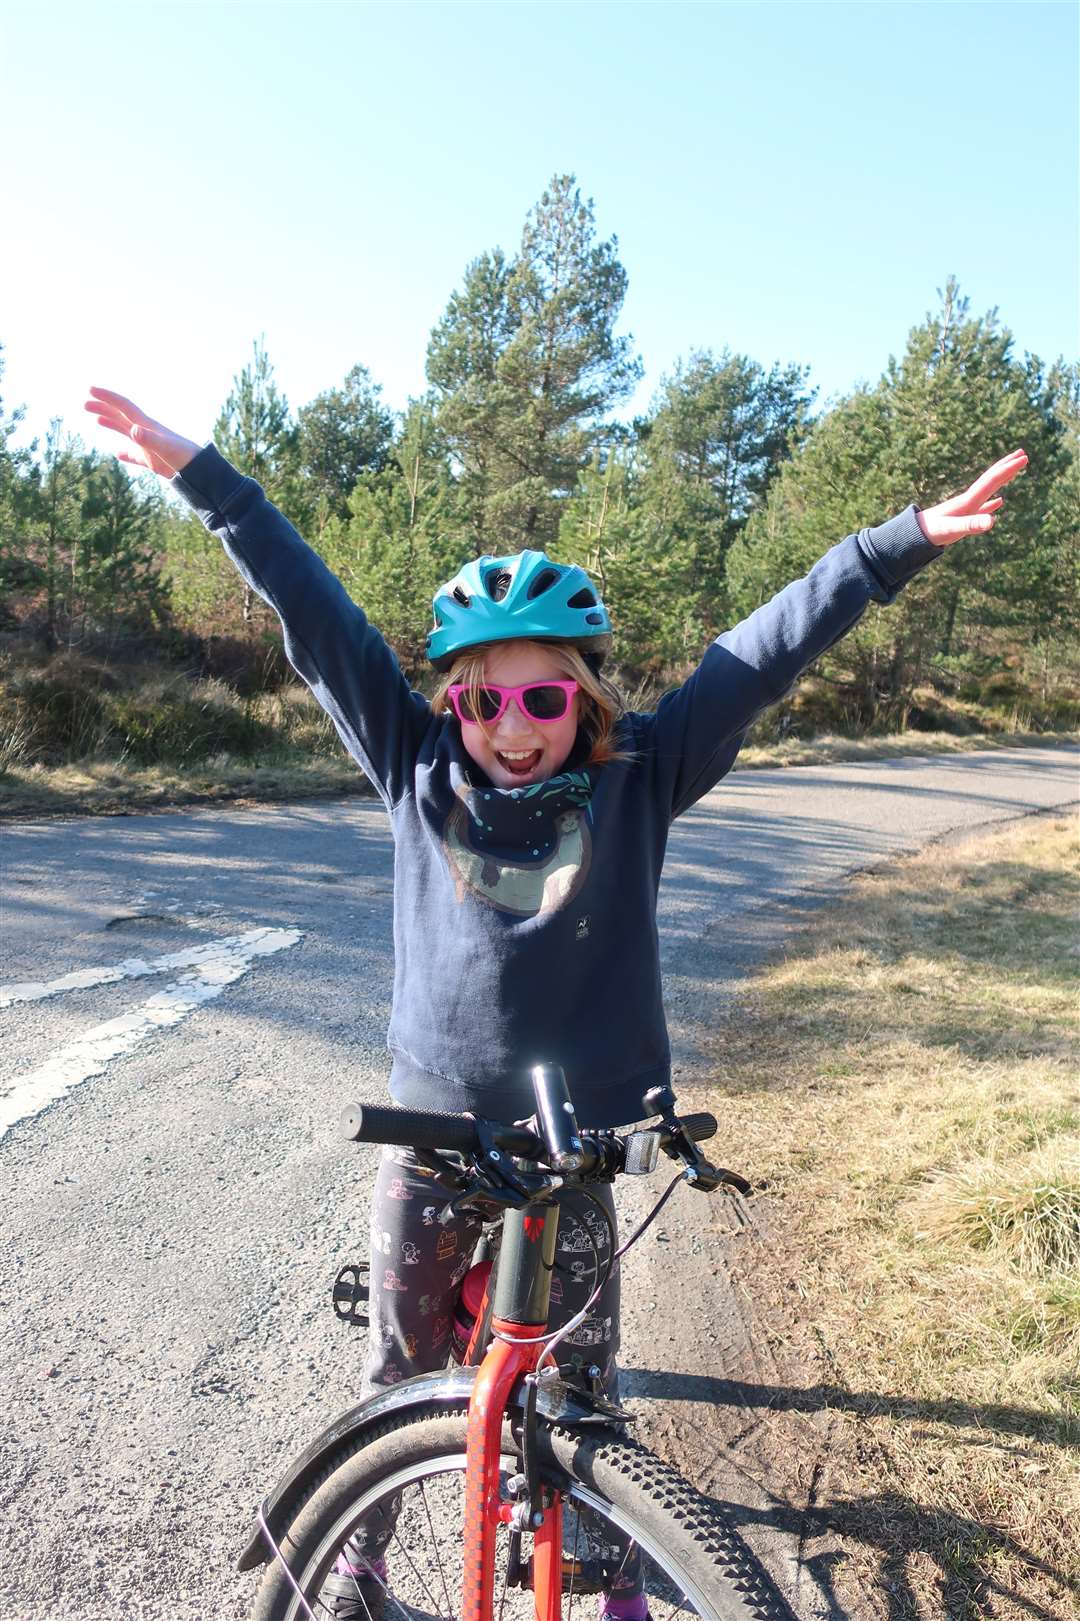 Jennifer celebrates reaching the top of the Macbain hill on a bike ride from Inverness.